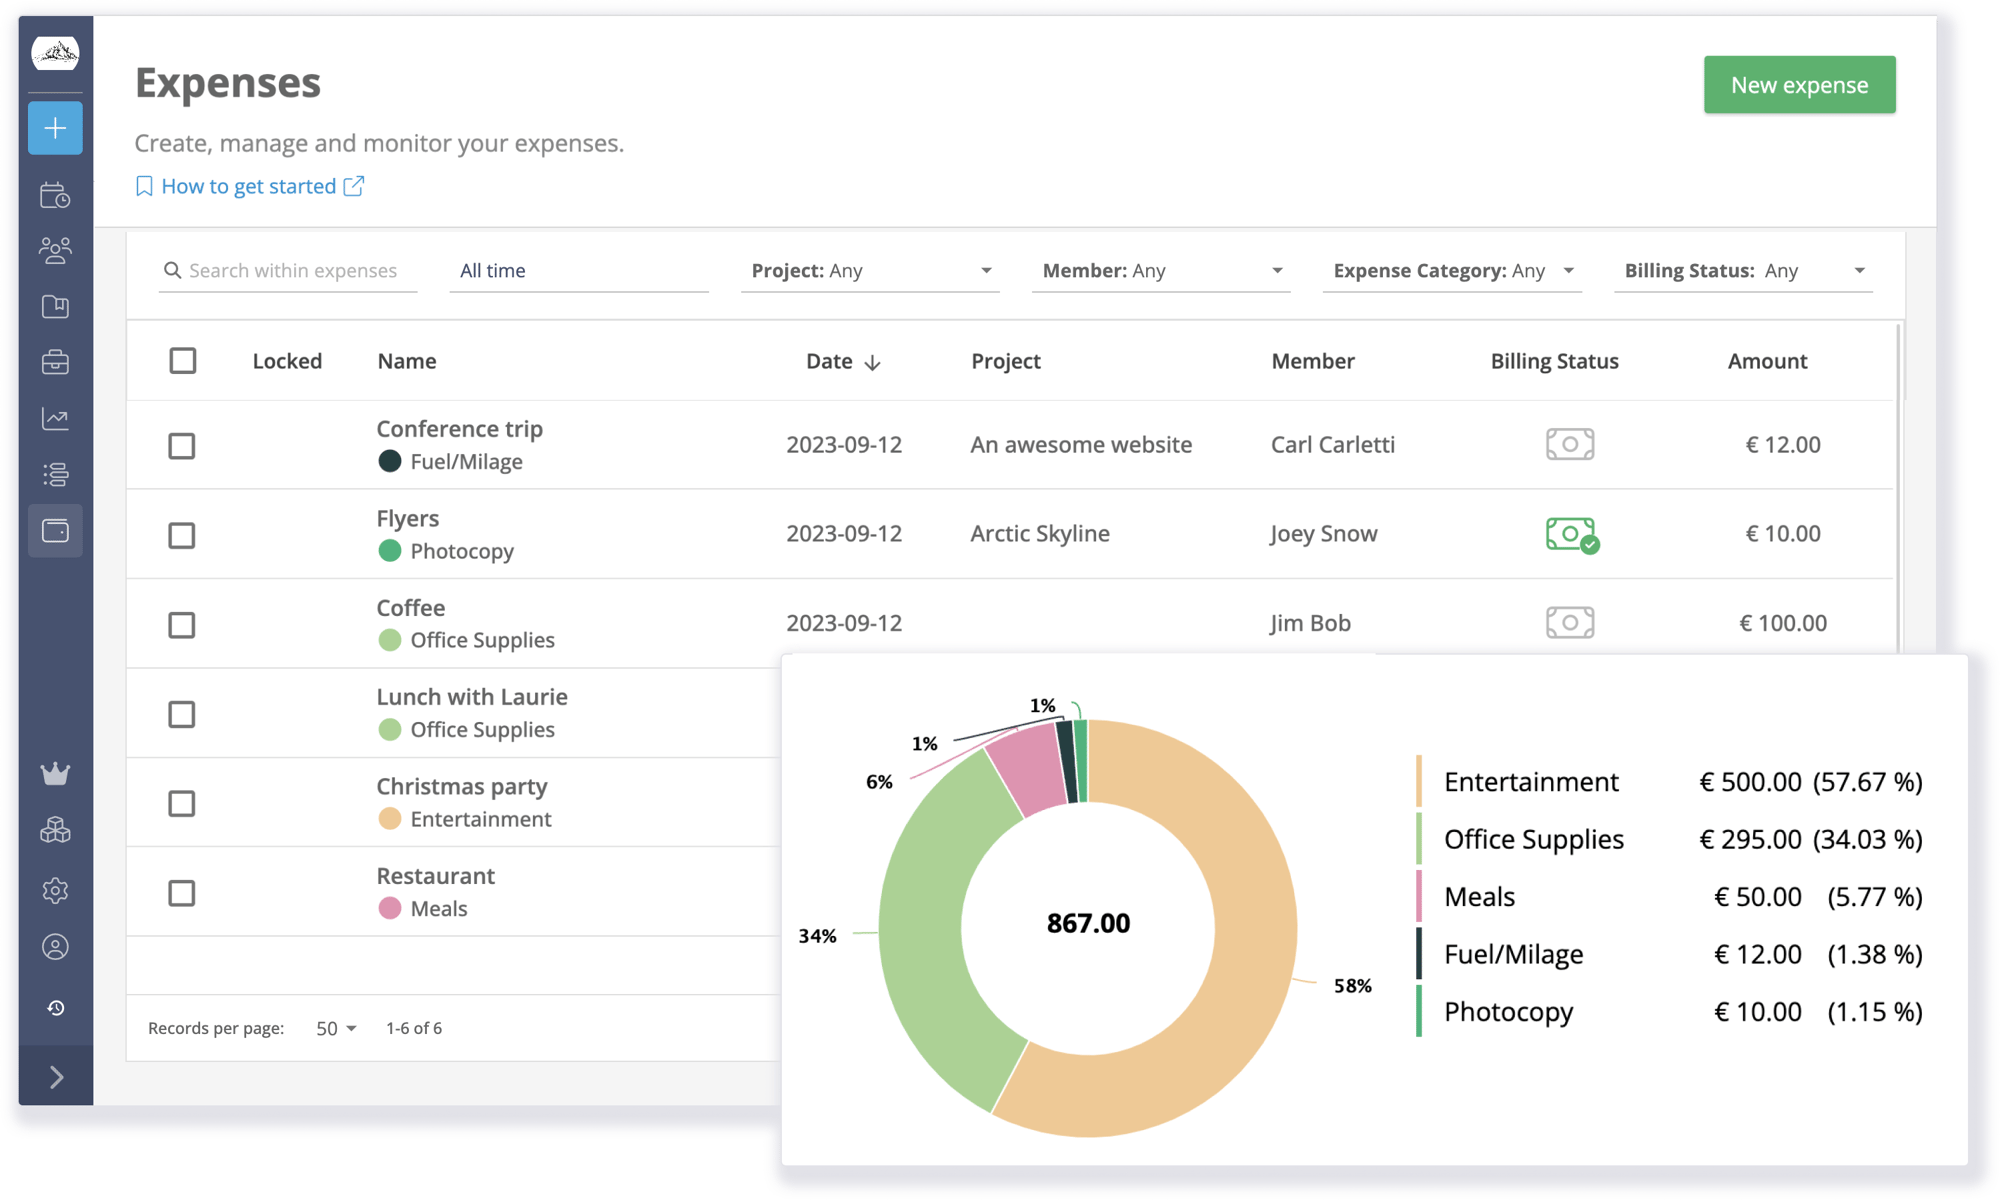 Expenses overview